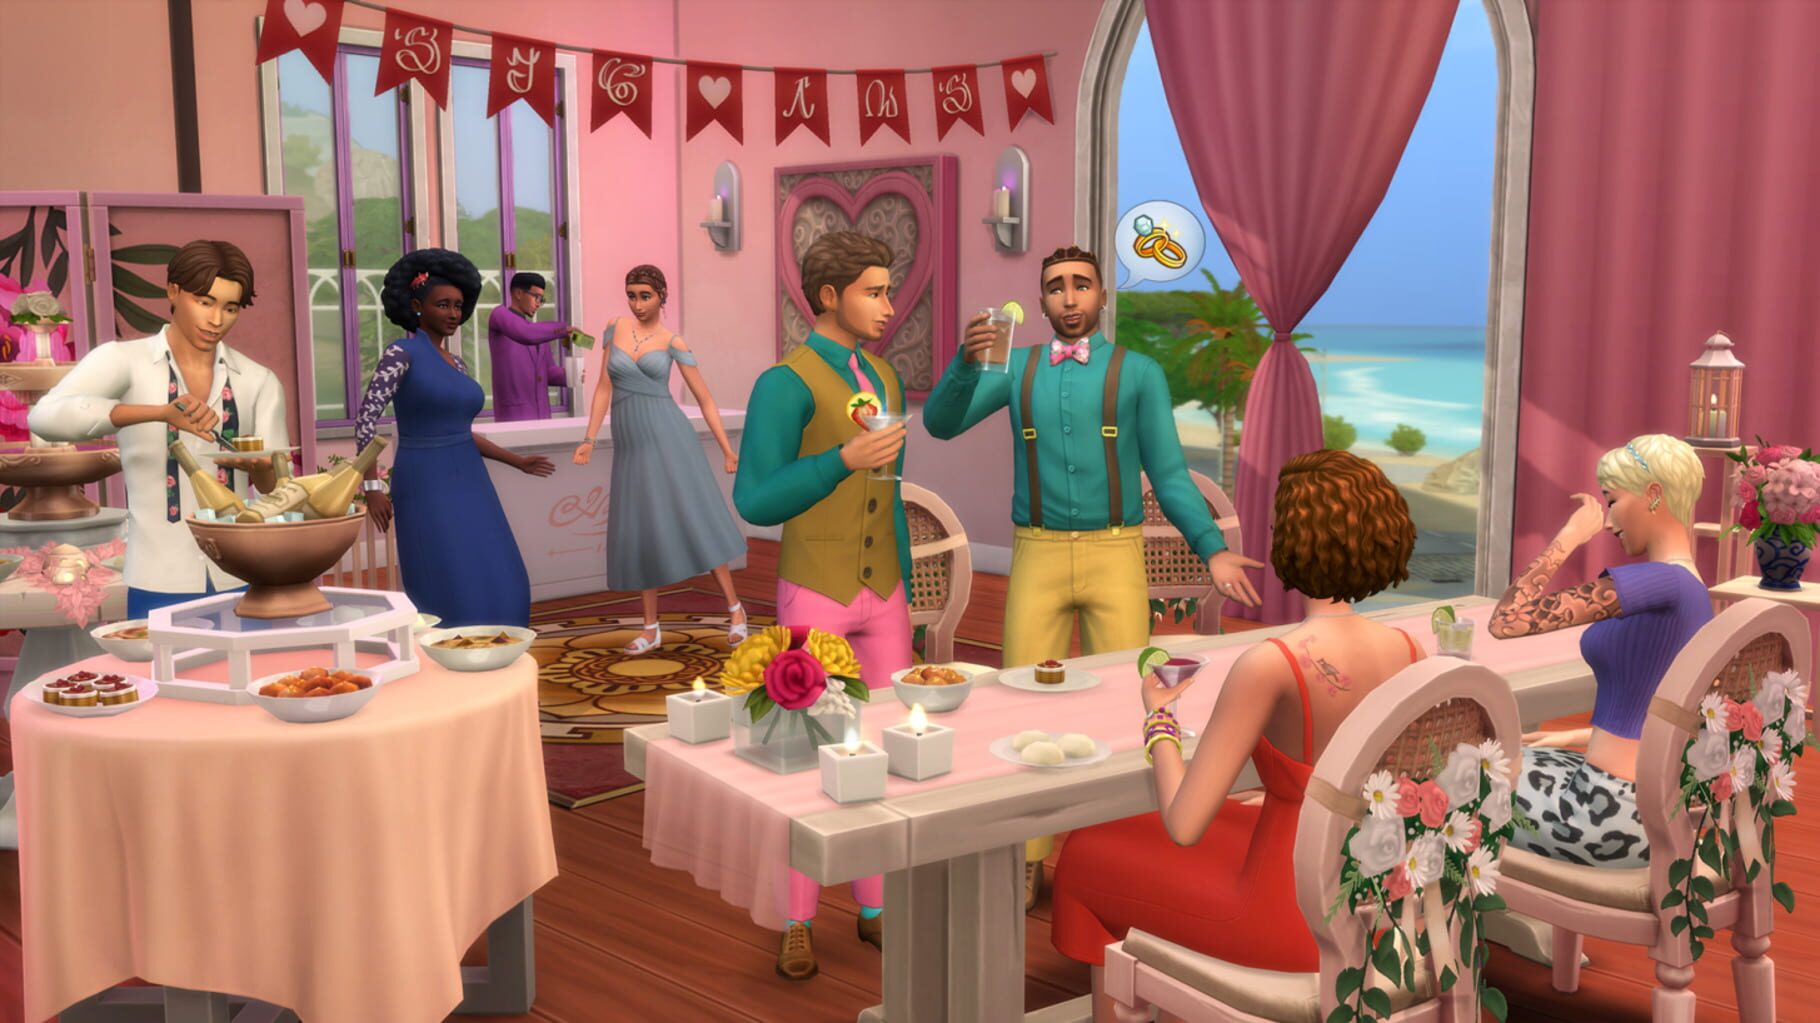 The Sims 4: My Wedding Stories Image